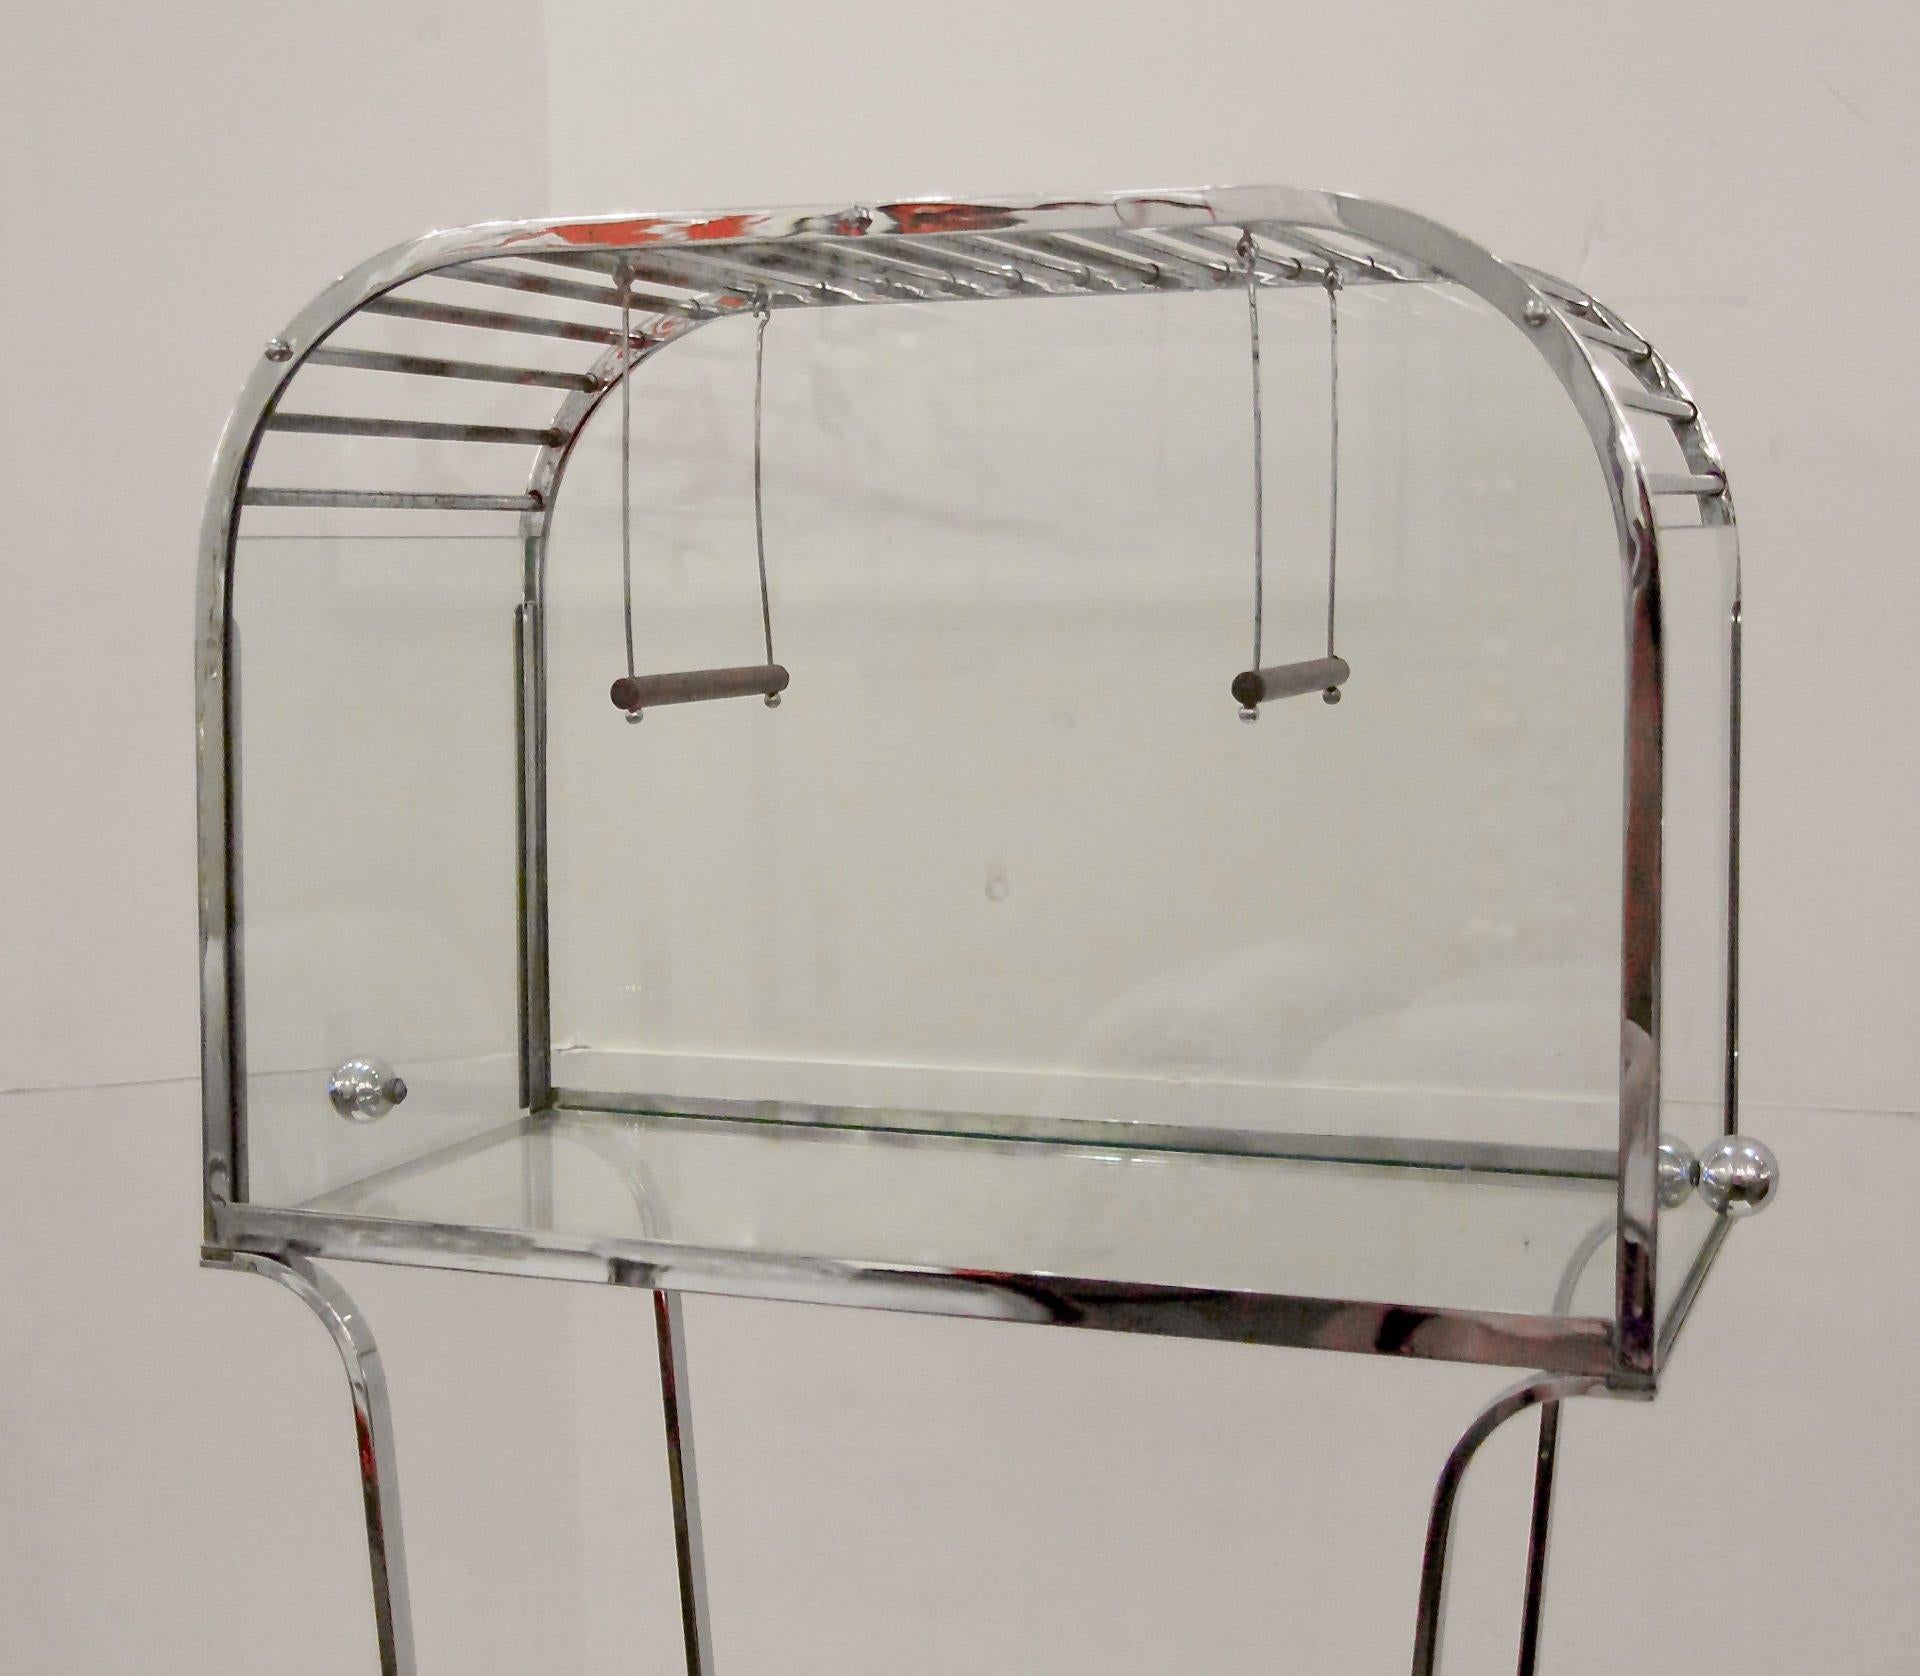 Art Deco Glass and Chrome Birdcage In Good Condition For Sale In Stamford, CT